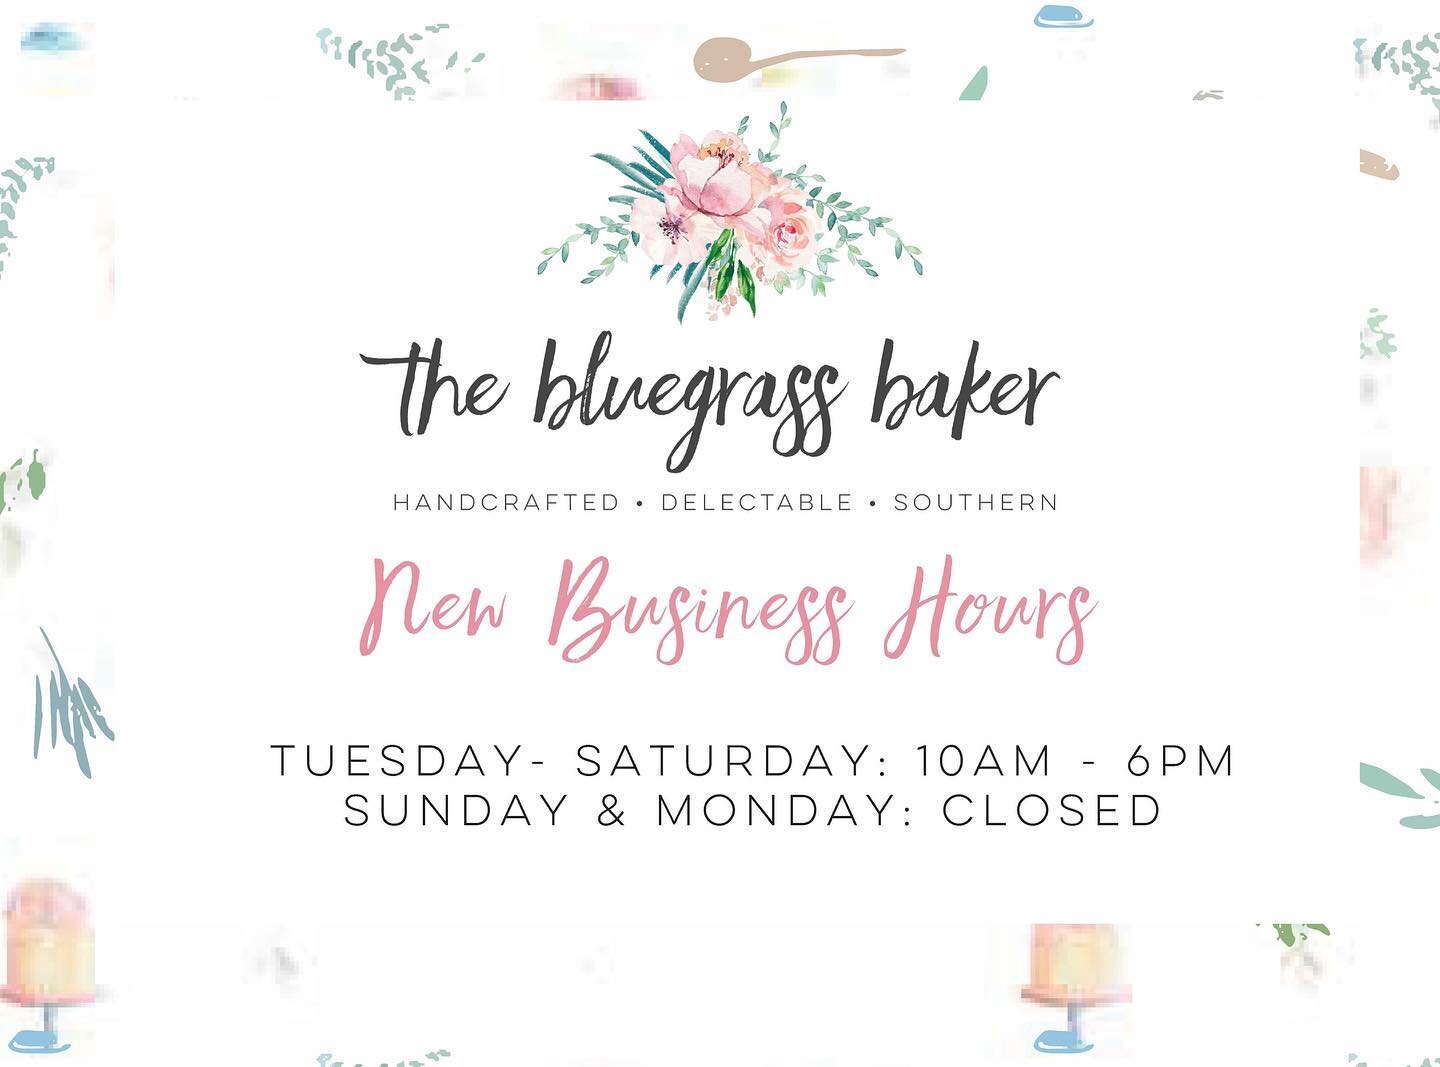 New business hours! This will start today! Our door decals do not reflect the change, just yet! Stay tuned for an exciting event tomorrow! I&rsquo;ll announce later today🍦🍦Thanks y&rsquo;all💙💙